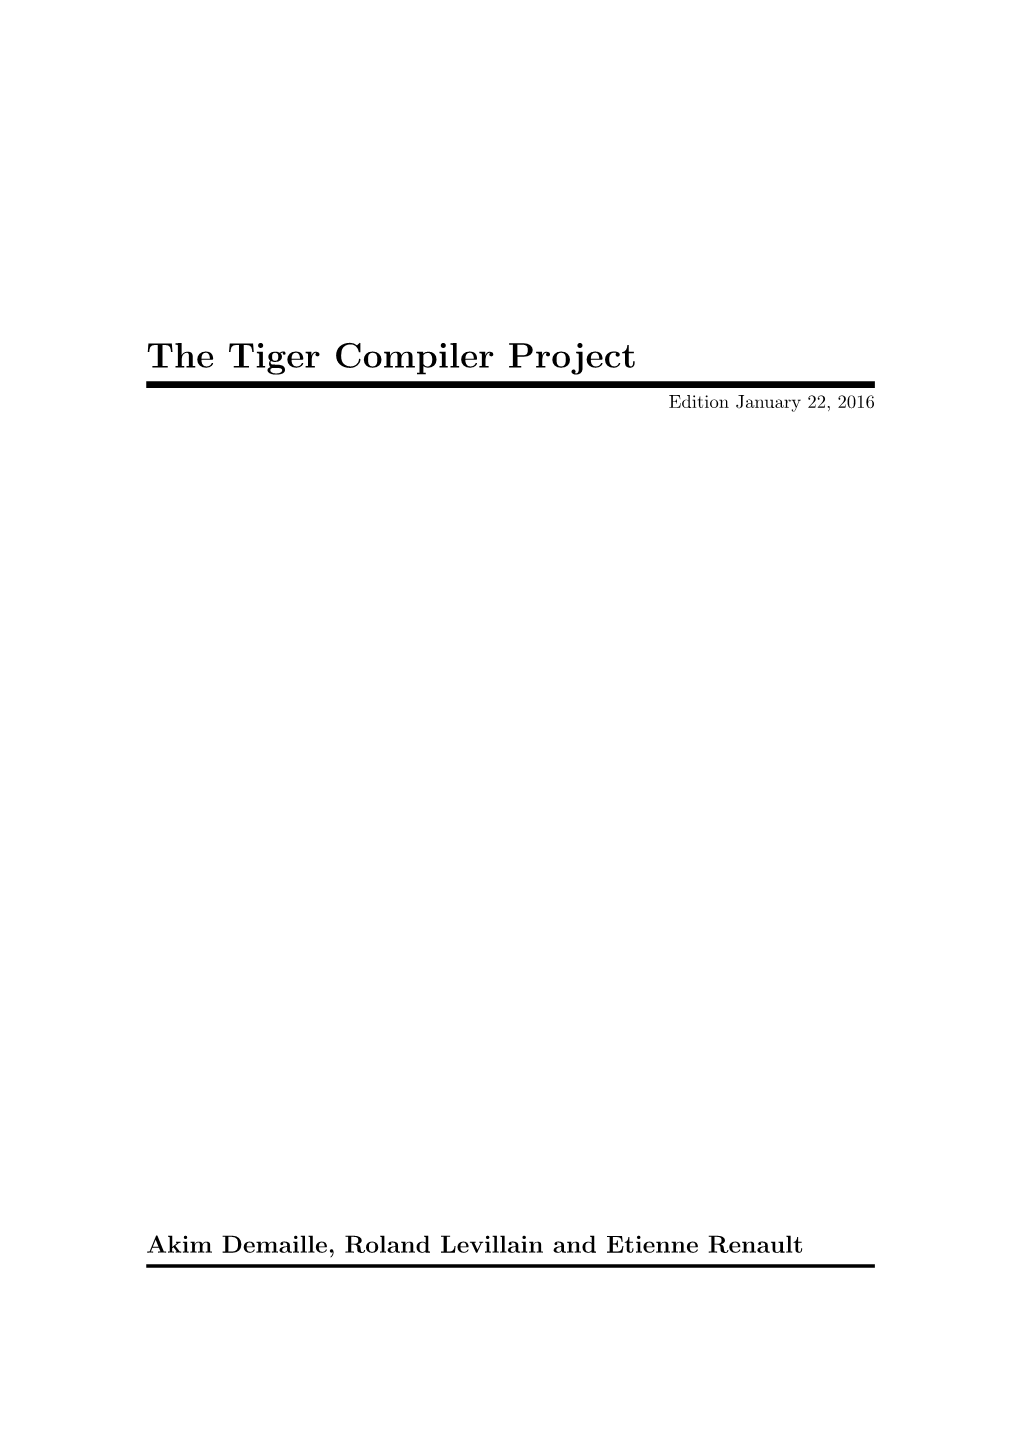 The Tiger Compiler Project Edition January 22, 2016